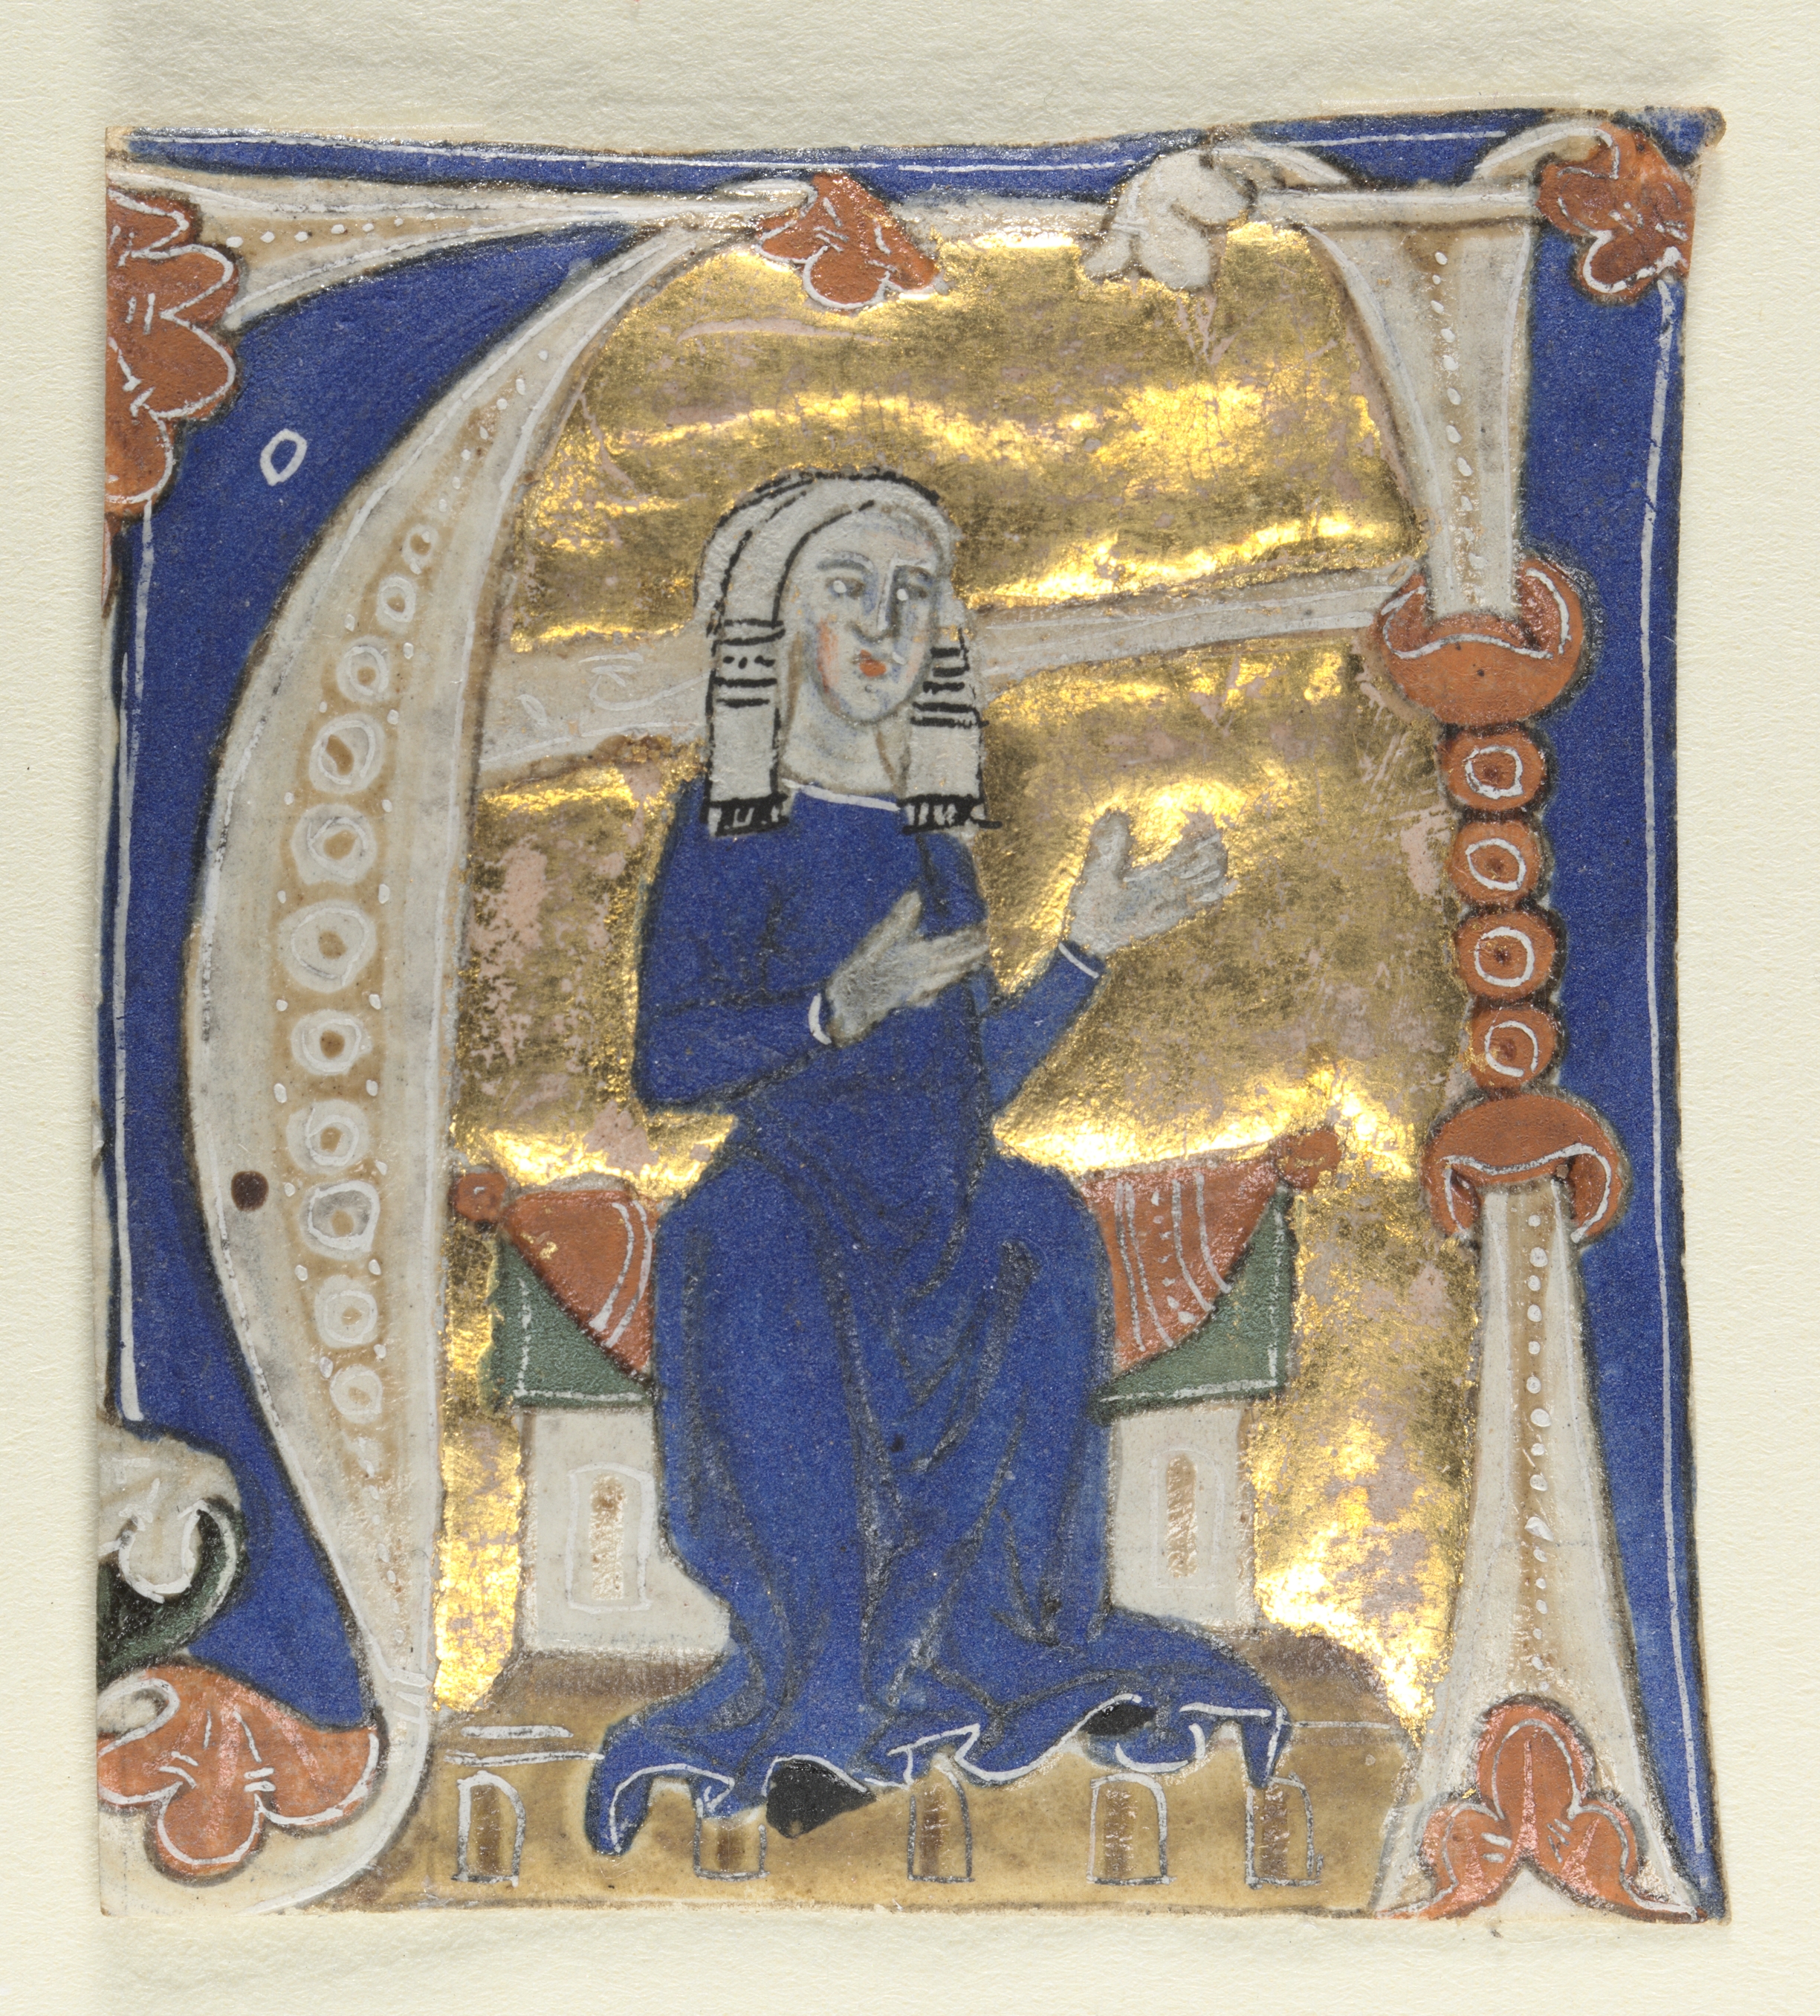 Historiated Initial (A) Excised from a Bible